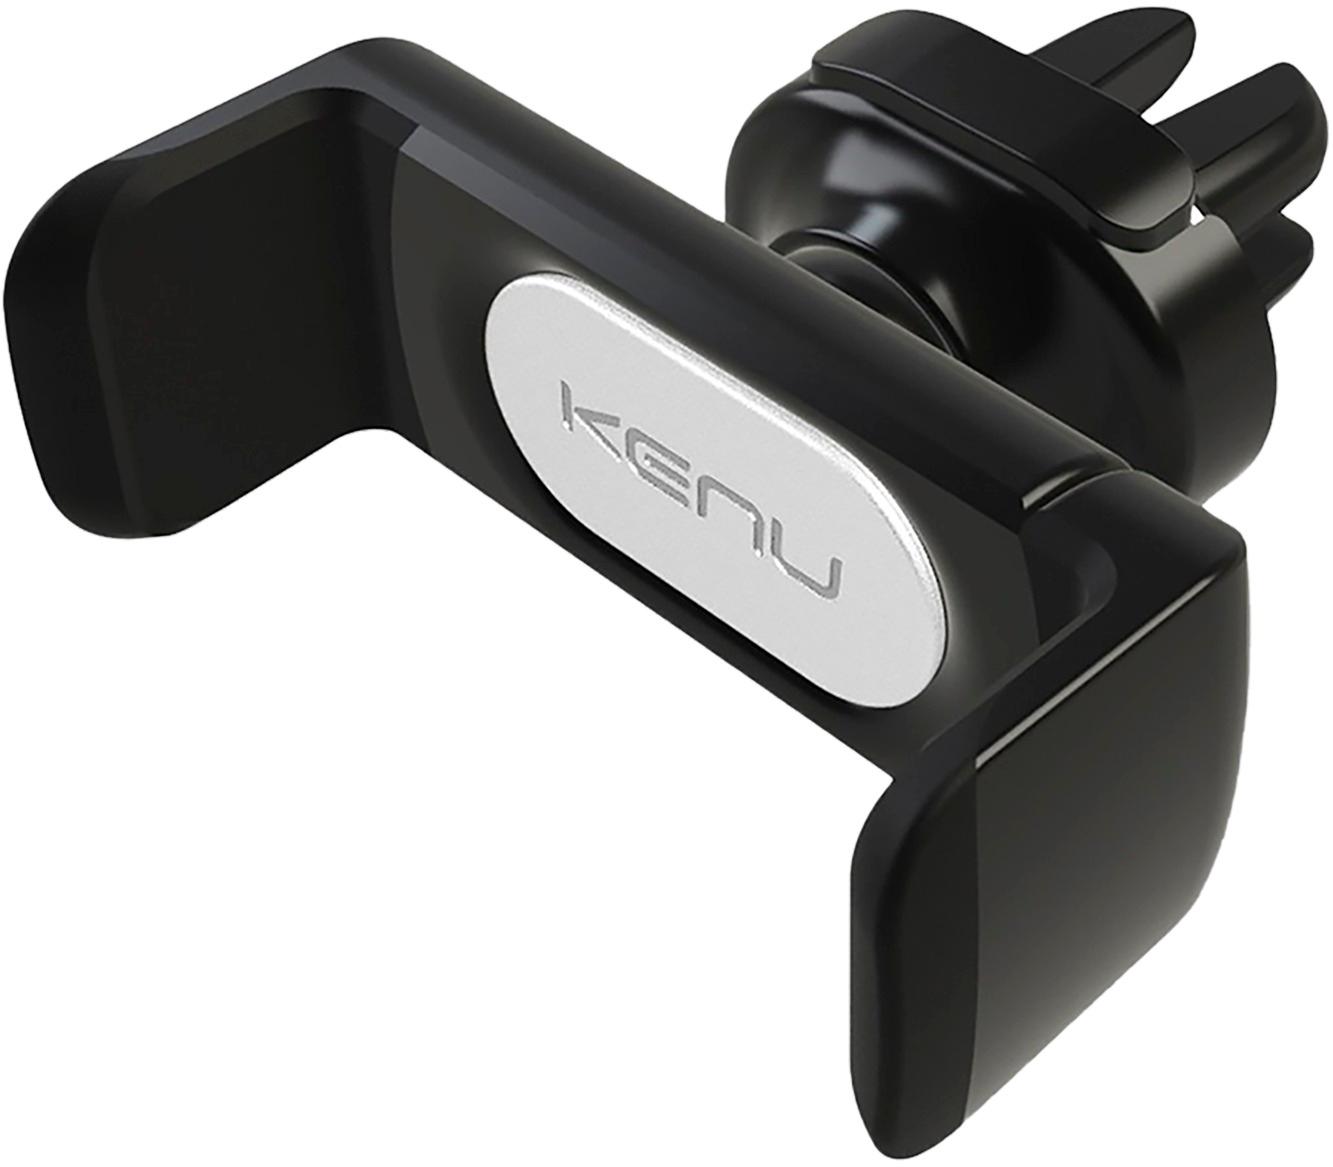 Angle View: Kenu - Airframe Pro Car Holder for Mobile Phones - Black